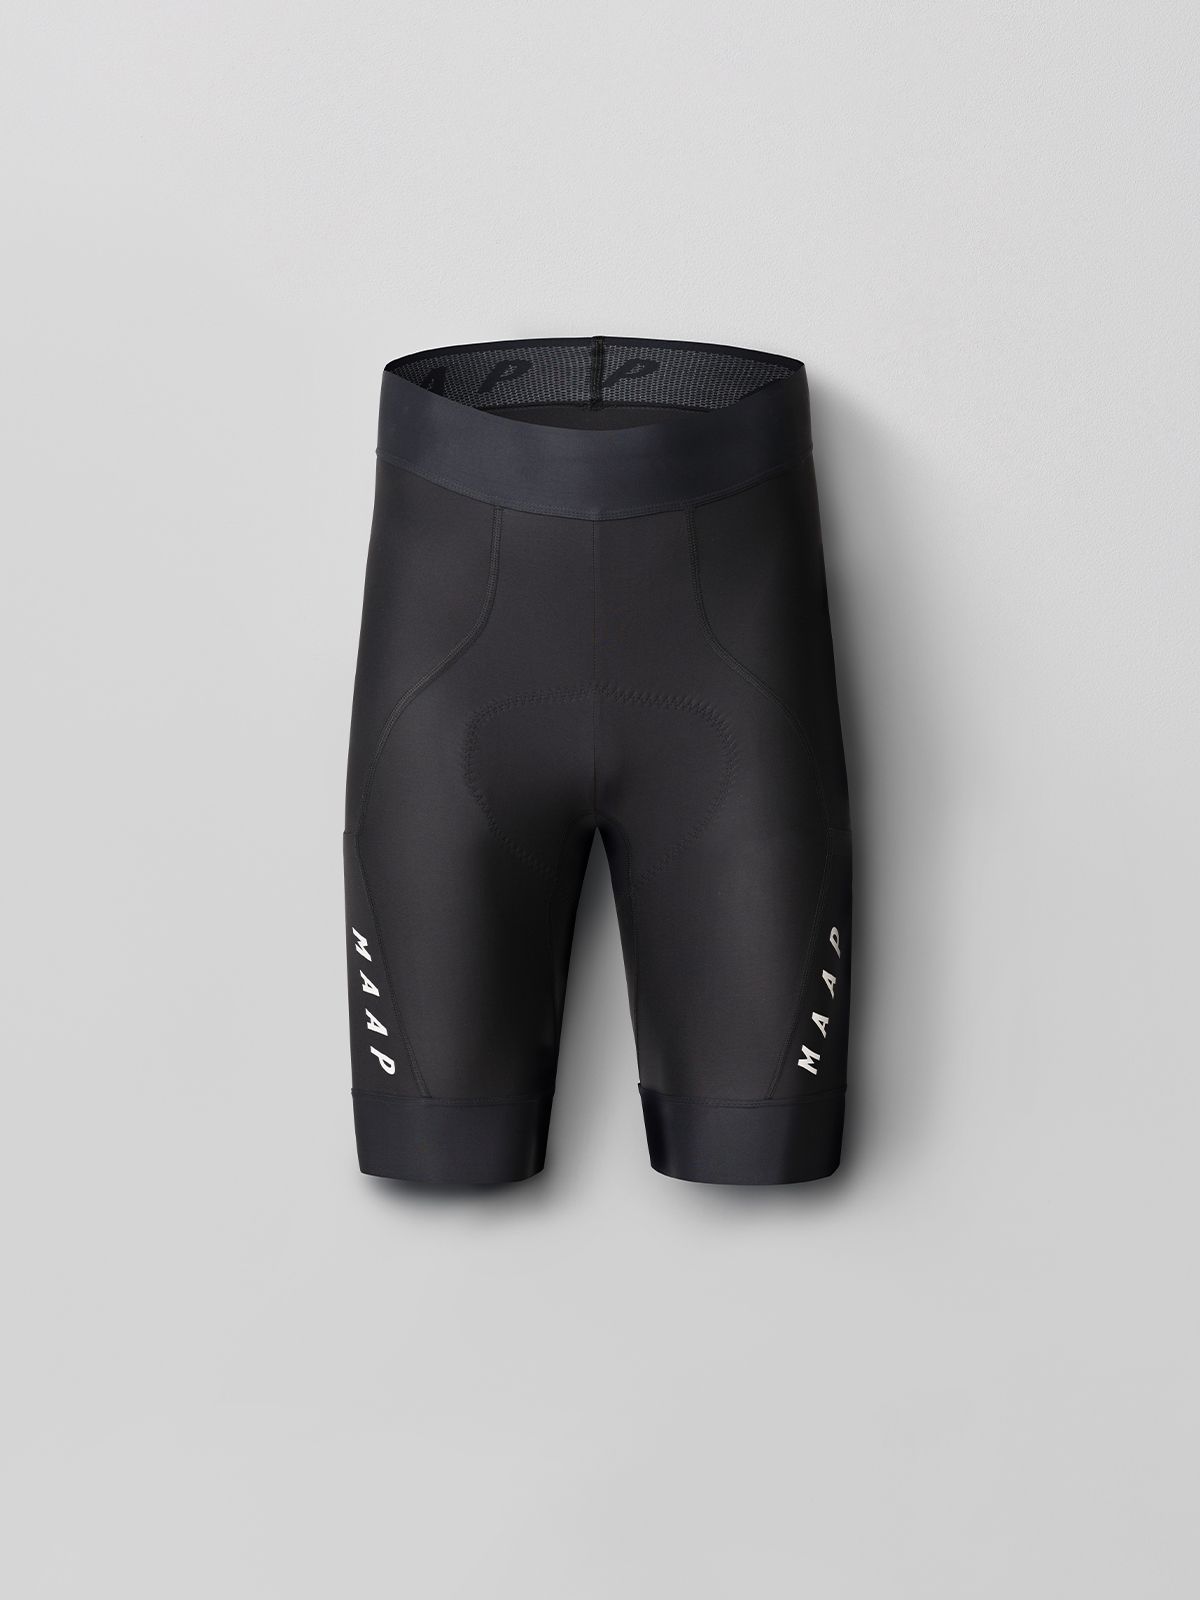 Sequence Ride Short (Black )